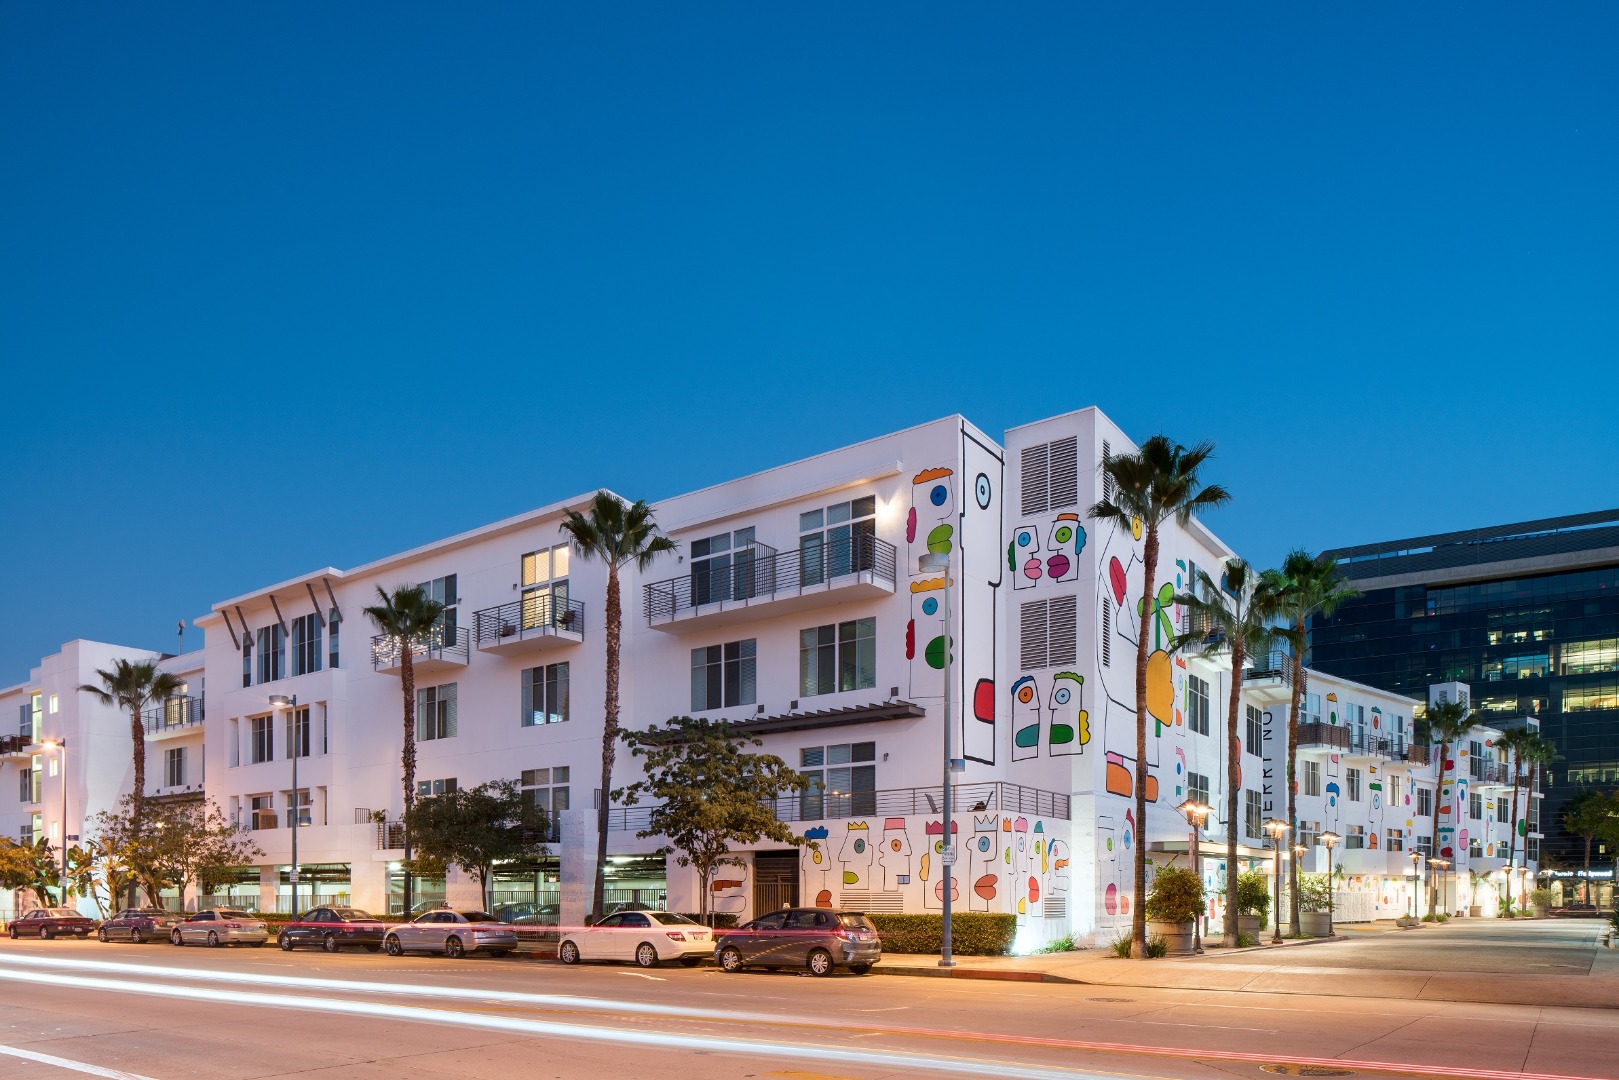 Street view of Lofts at NoHo Commons, 3 story white building with colorful abstract face murals on one side of the building and palm trees surrounding builing